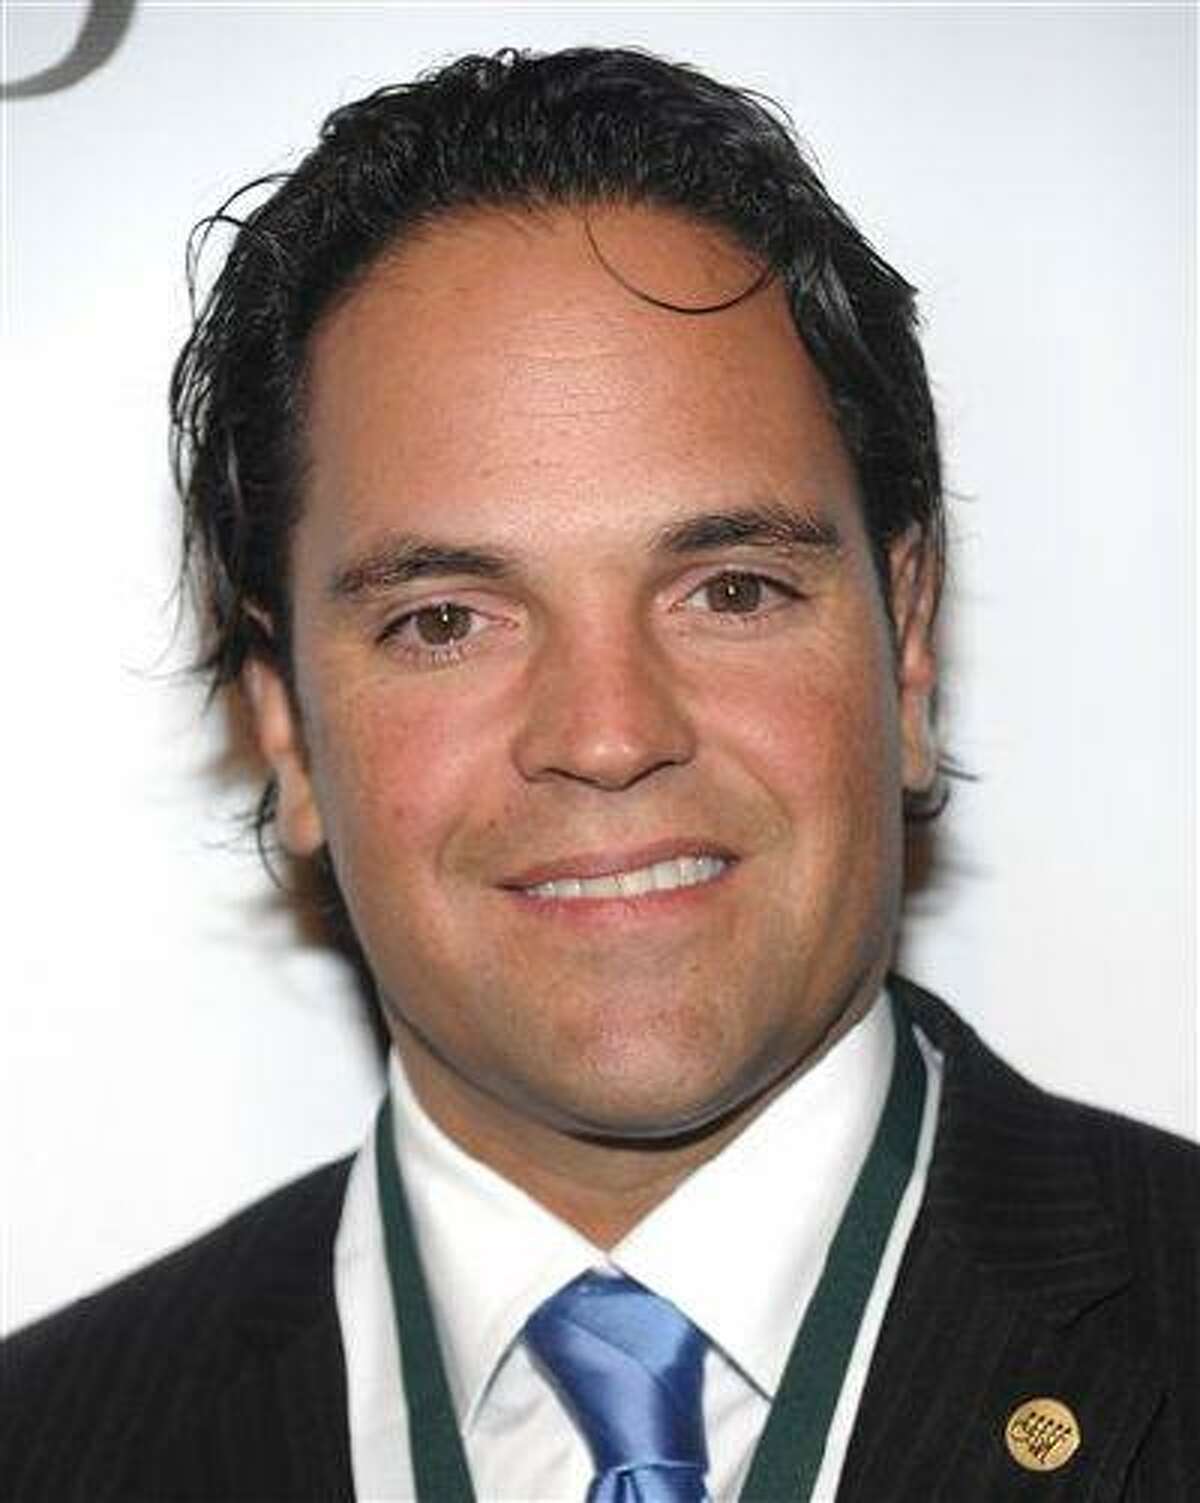 Former MLB star Mike Piazza attends the 2009 Great Sports Legends Dinner benefitting The Buoniconti Fund to Cure Paralysis at the Waldorf-Astoria Hotel on Oct. 6, 2009 in New York.